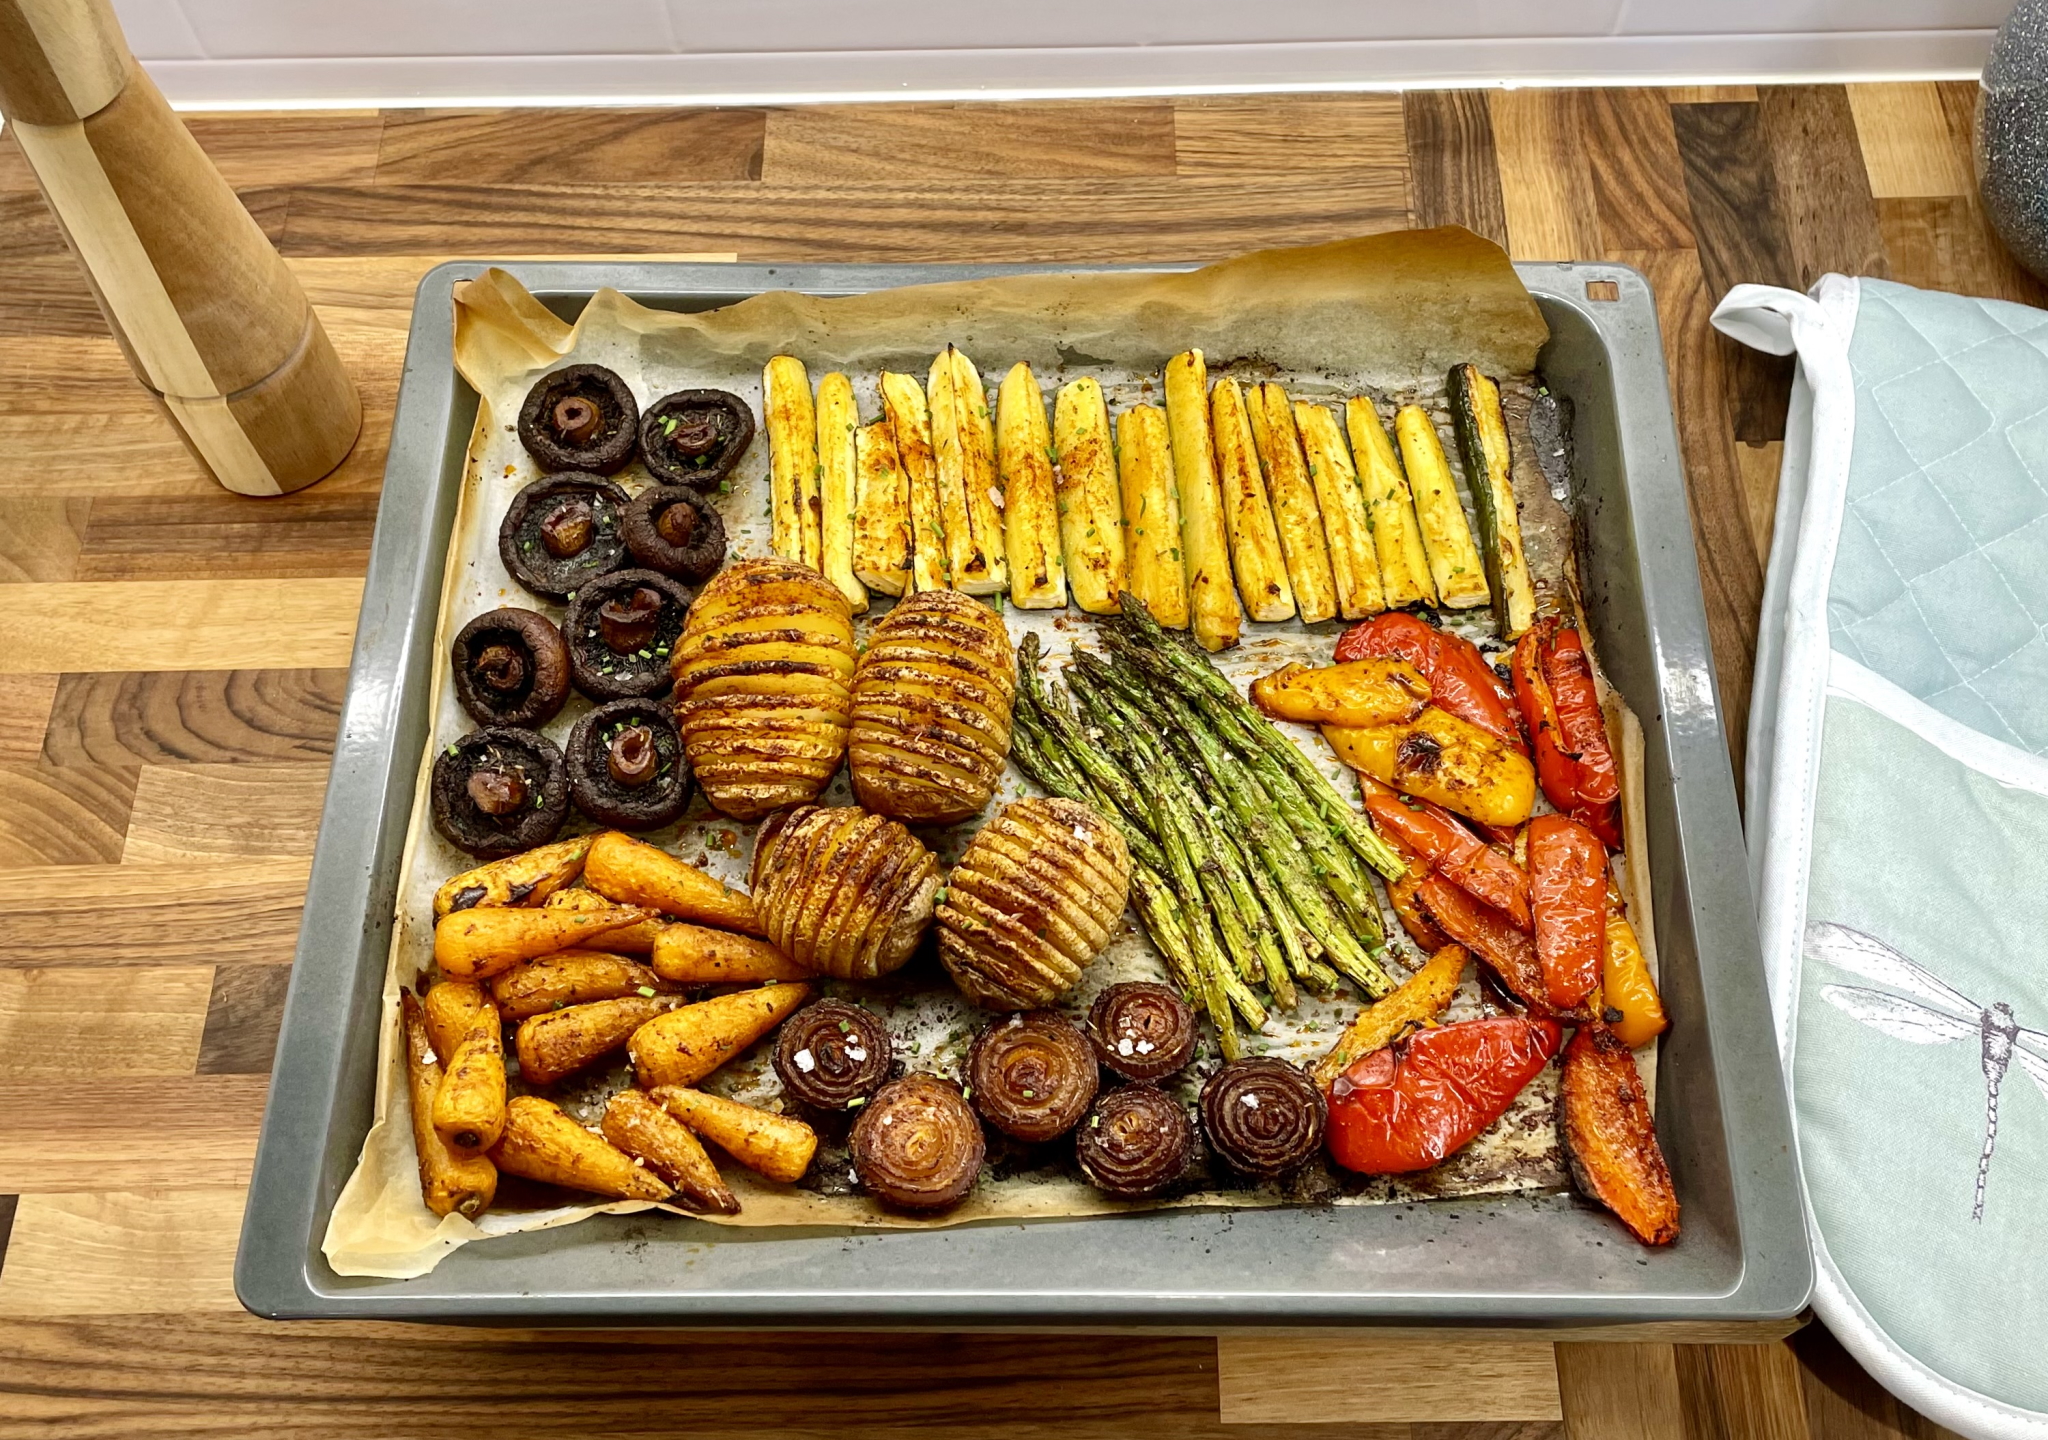 Hasselback Potatoes and Swedish Style Roasted Vegetables